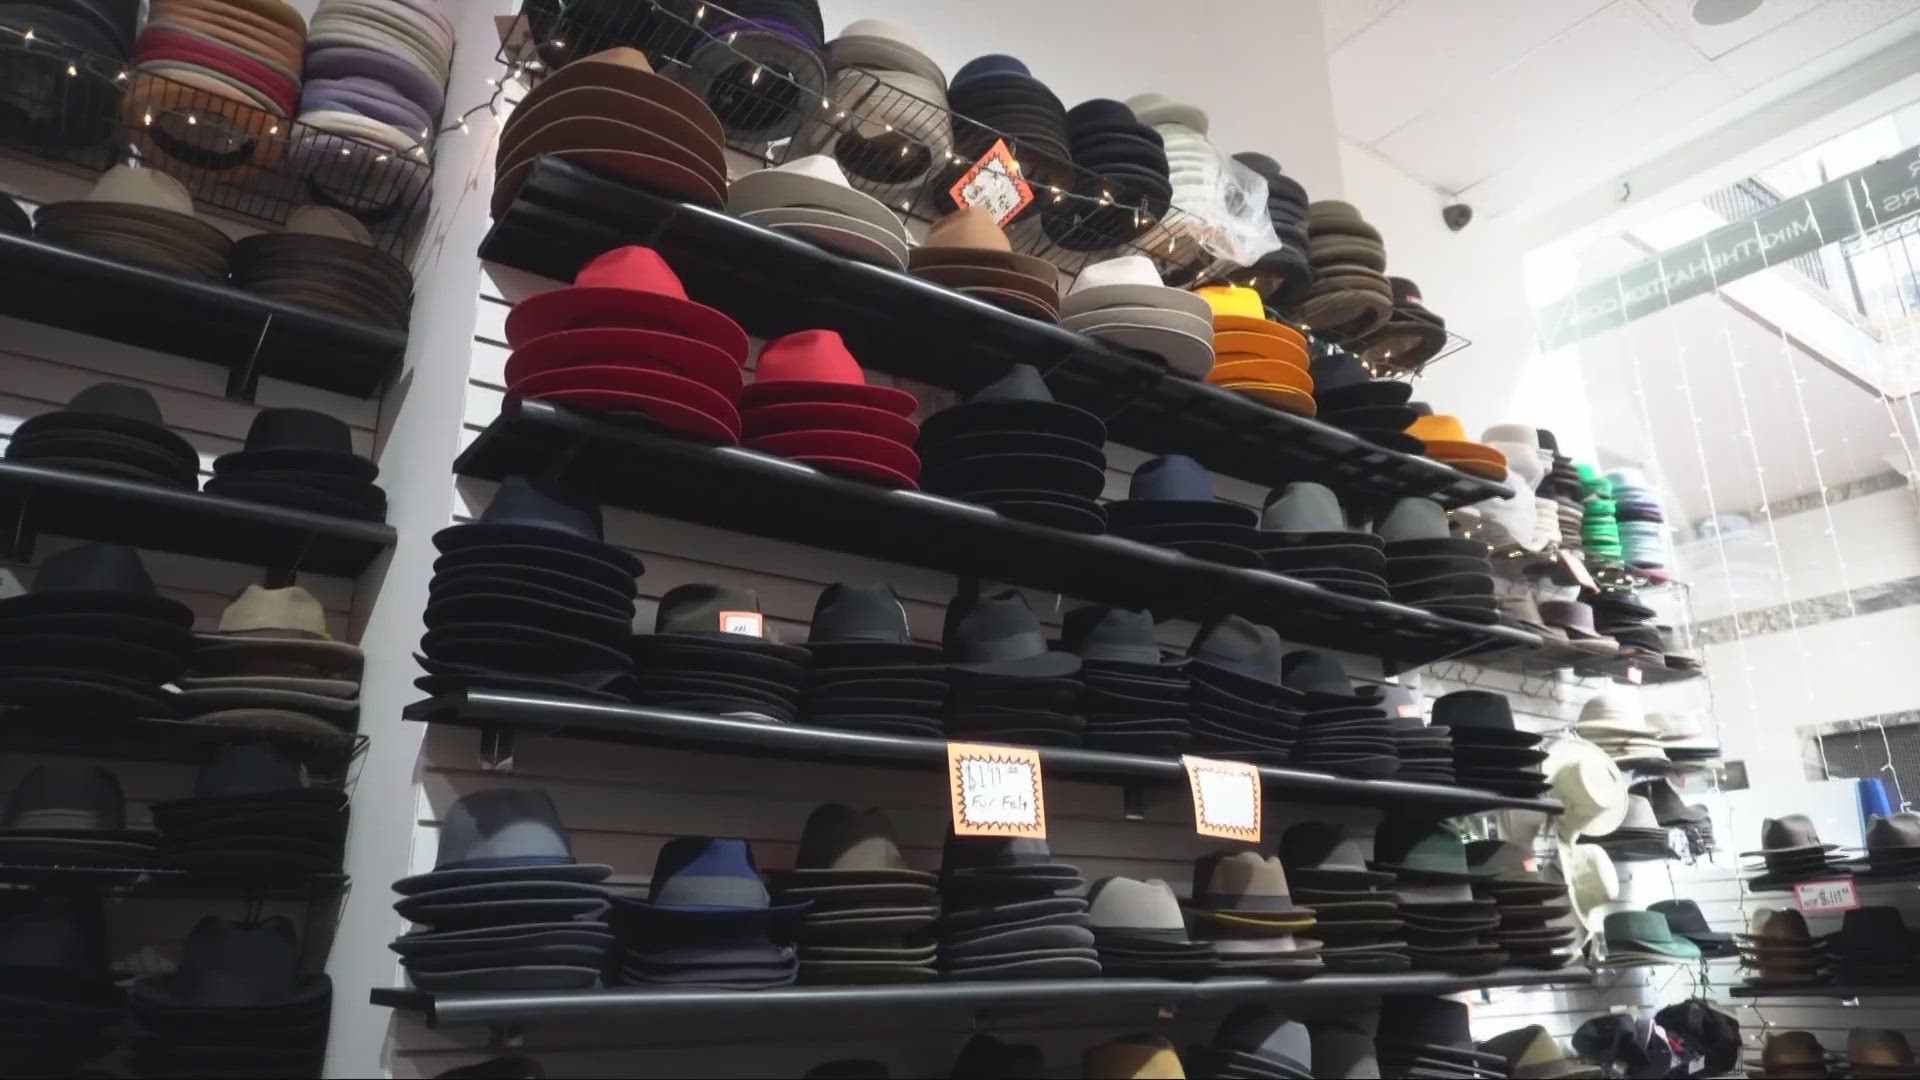 "Our tagline is 'hats are back,' but we never think they left."